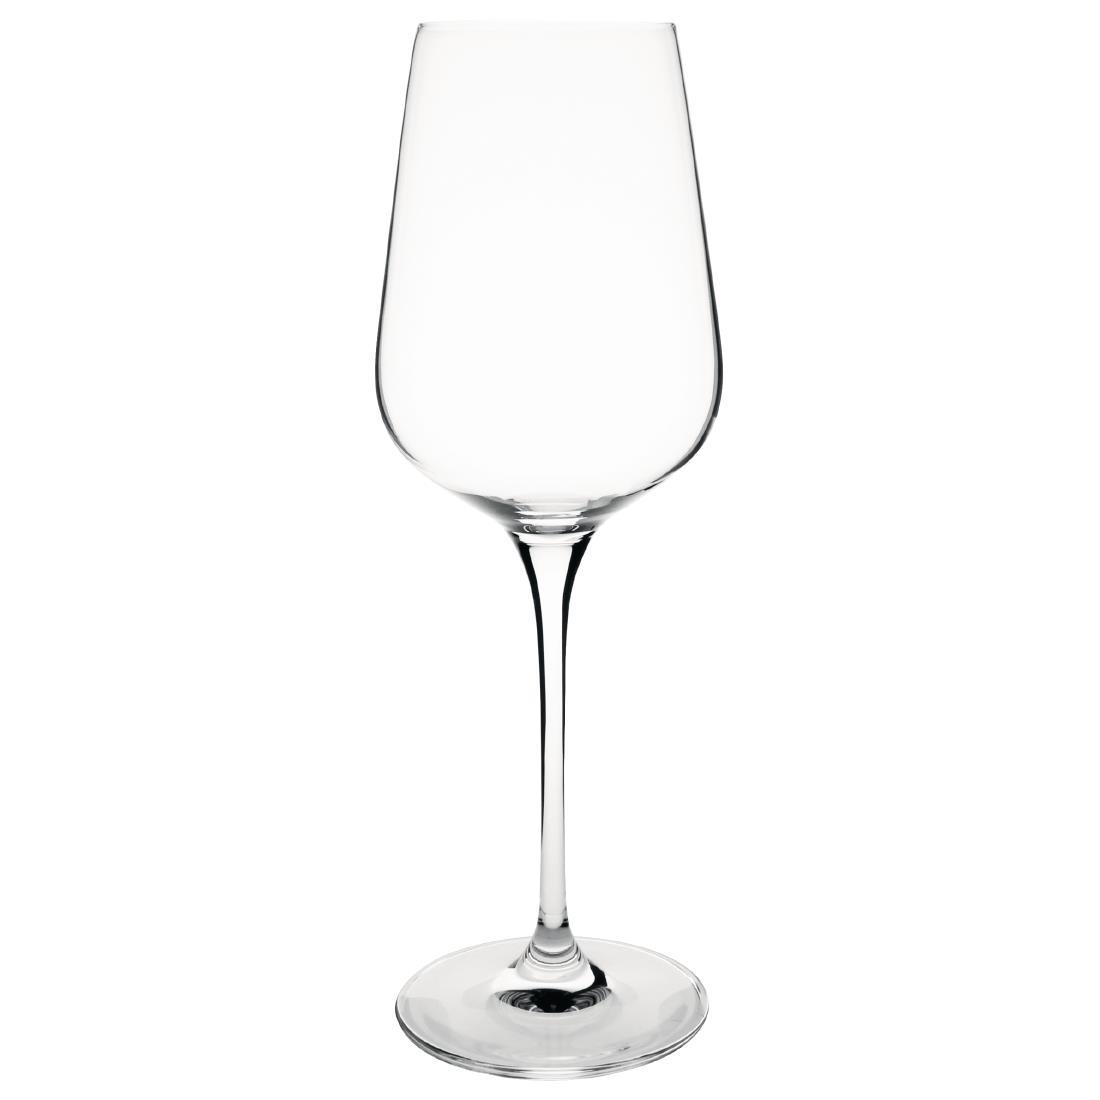 Olympia Claro One Piece Crystal Wine Glasses 540ml  (Pack of 6) - CS466  - 1